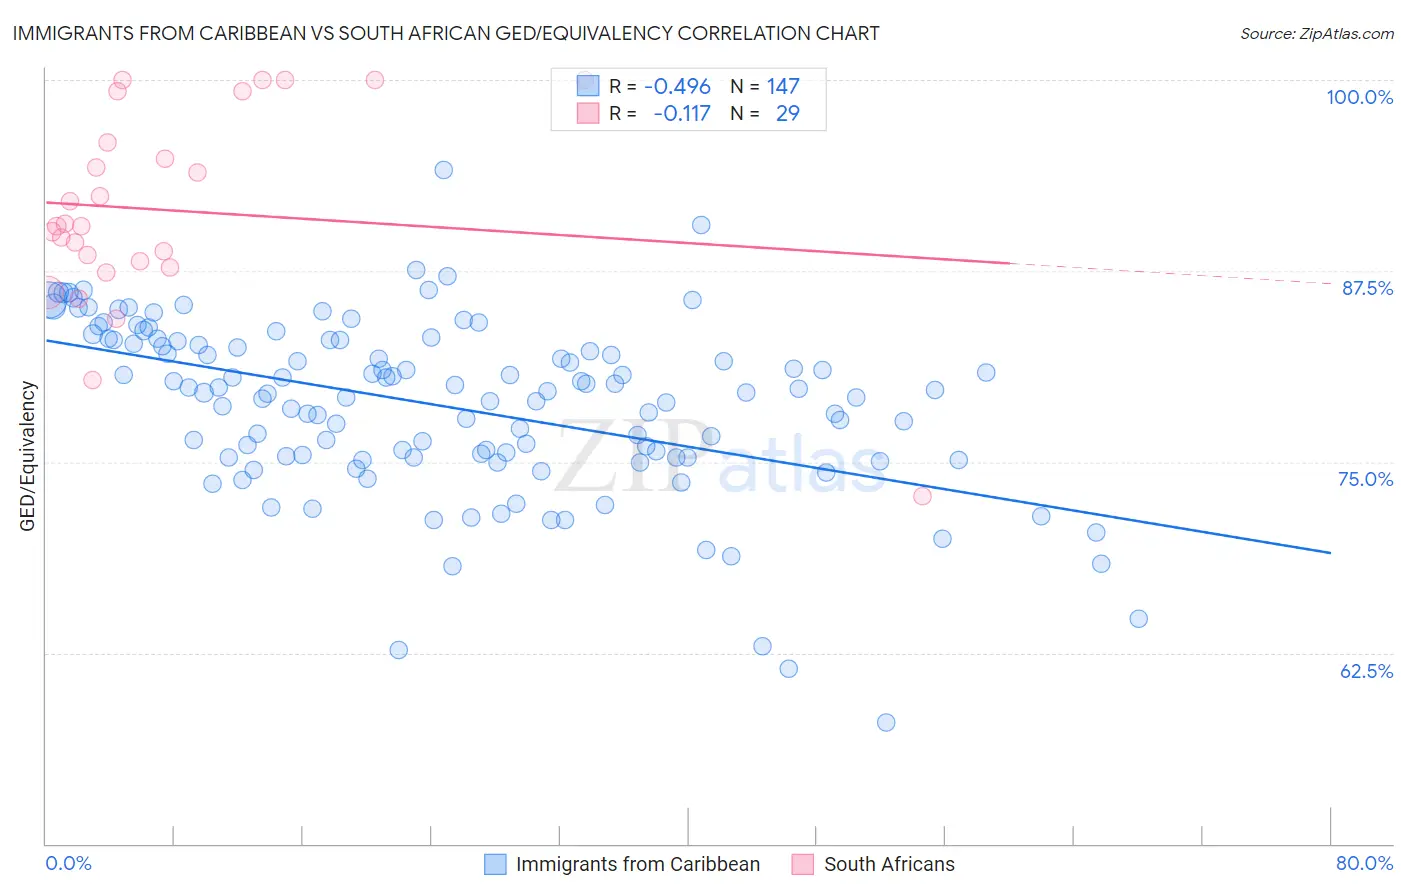 Immigrants from Caribbean vs South African GED/Equivalency